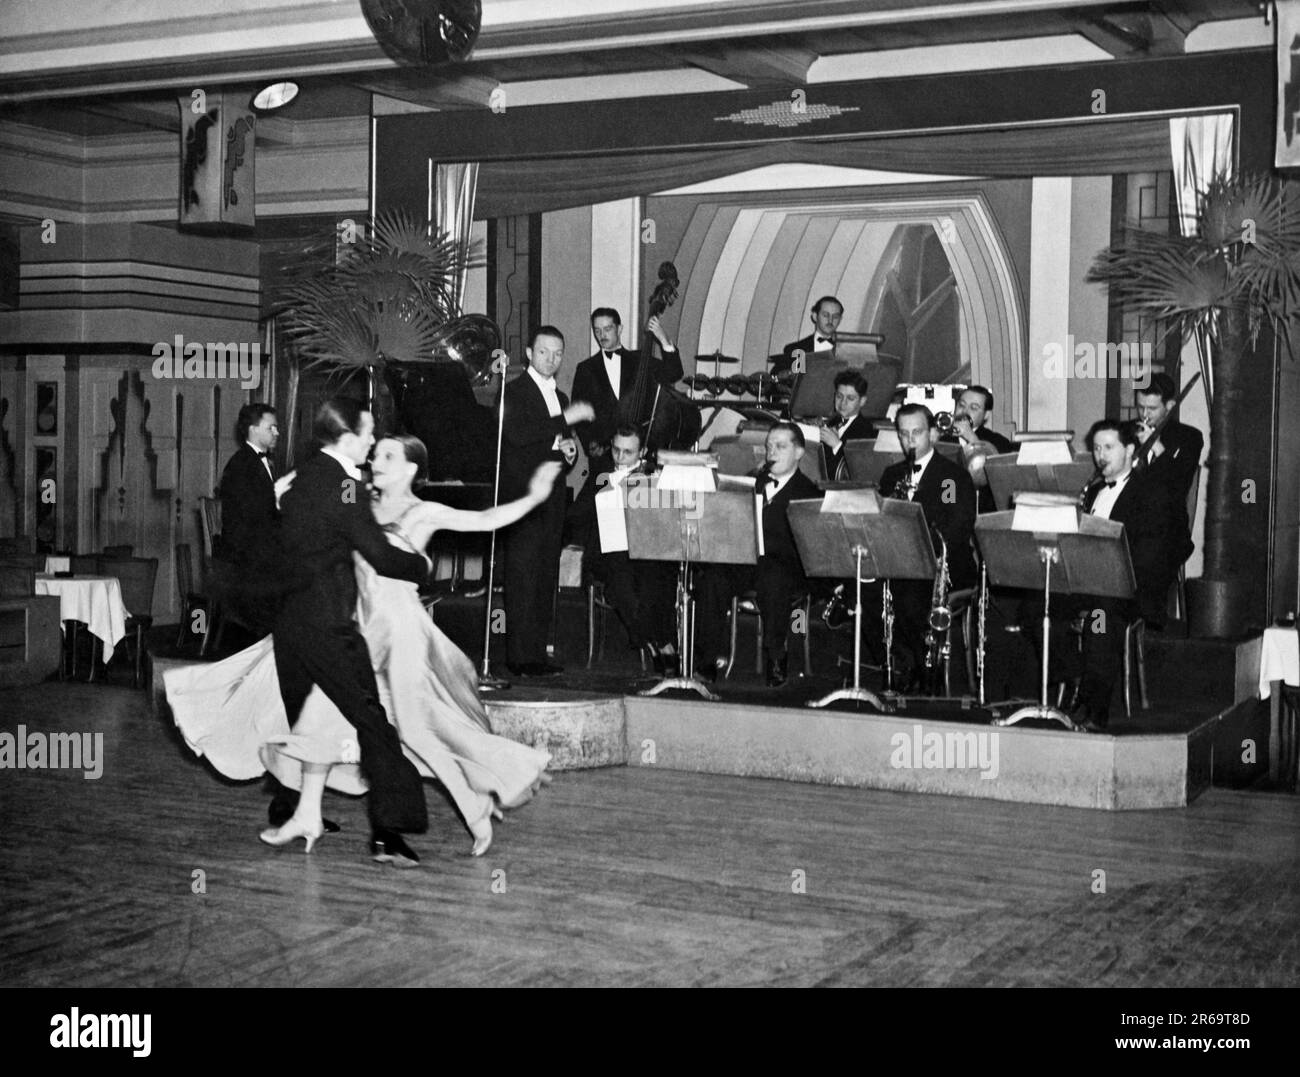 New York, New York:  c. 1938. Cabaret dancing at the Gloria Palast nightclub on 86th St in Yorkville, which is now known as the Upper East Side. Stock Photo